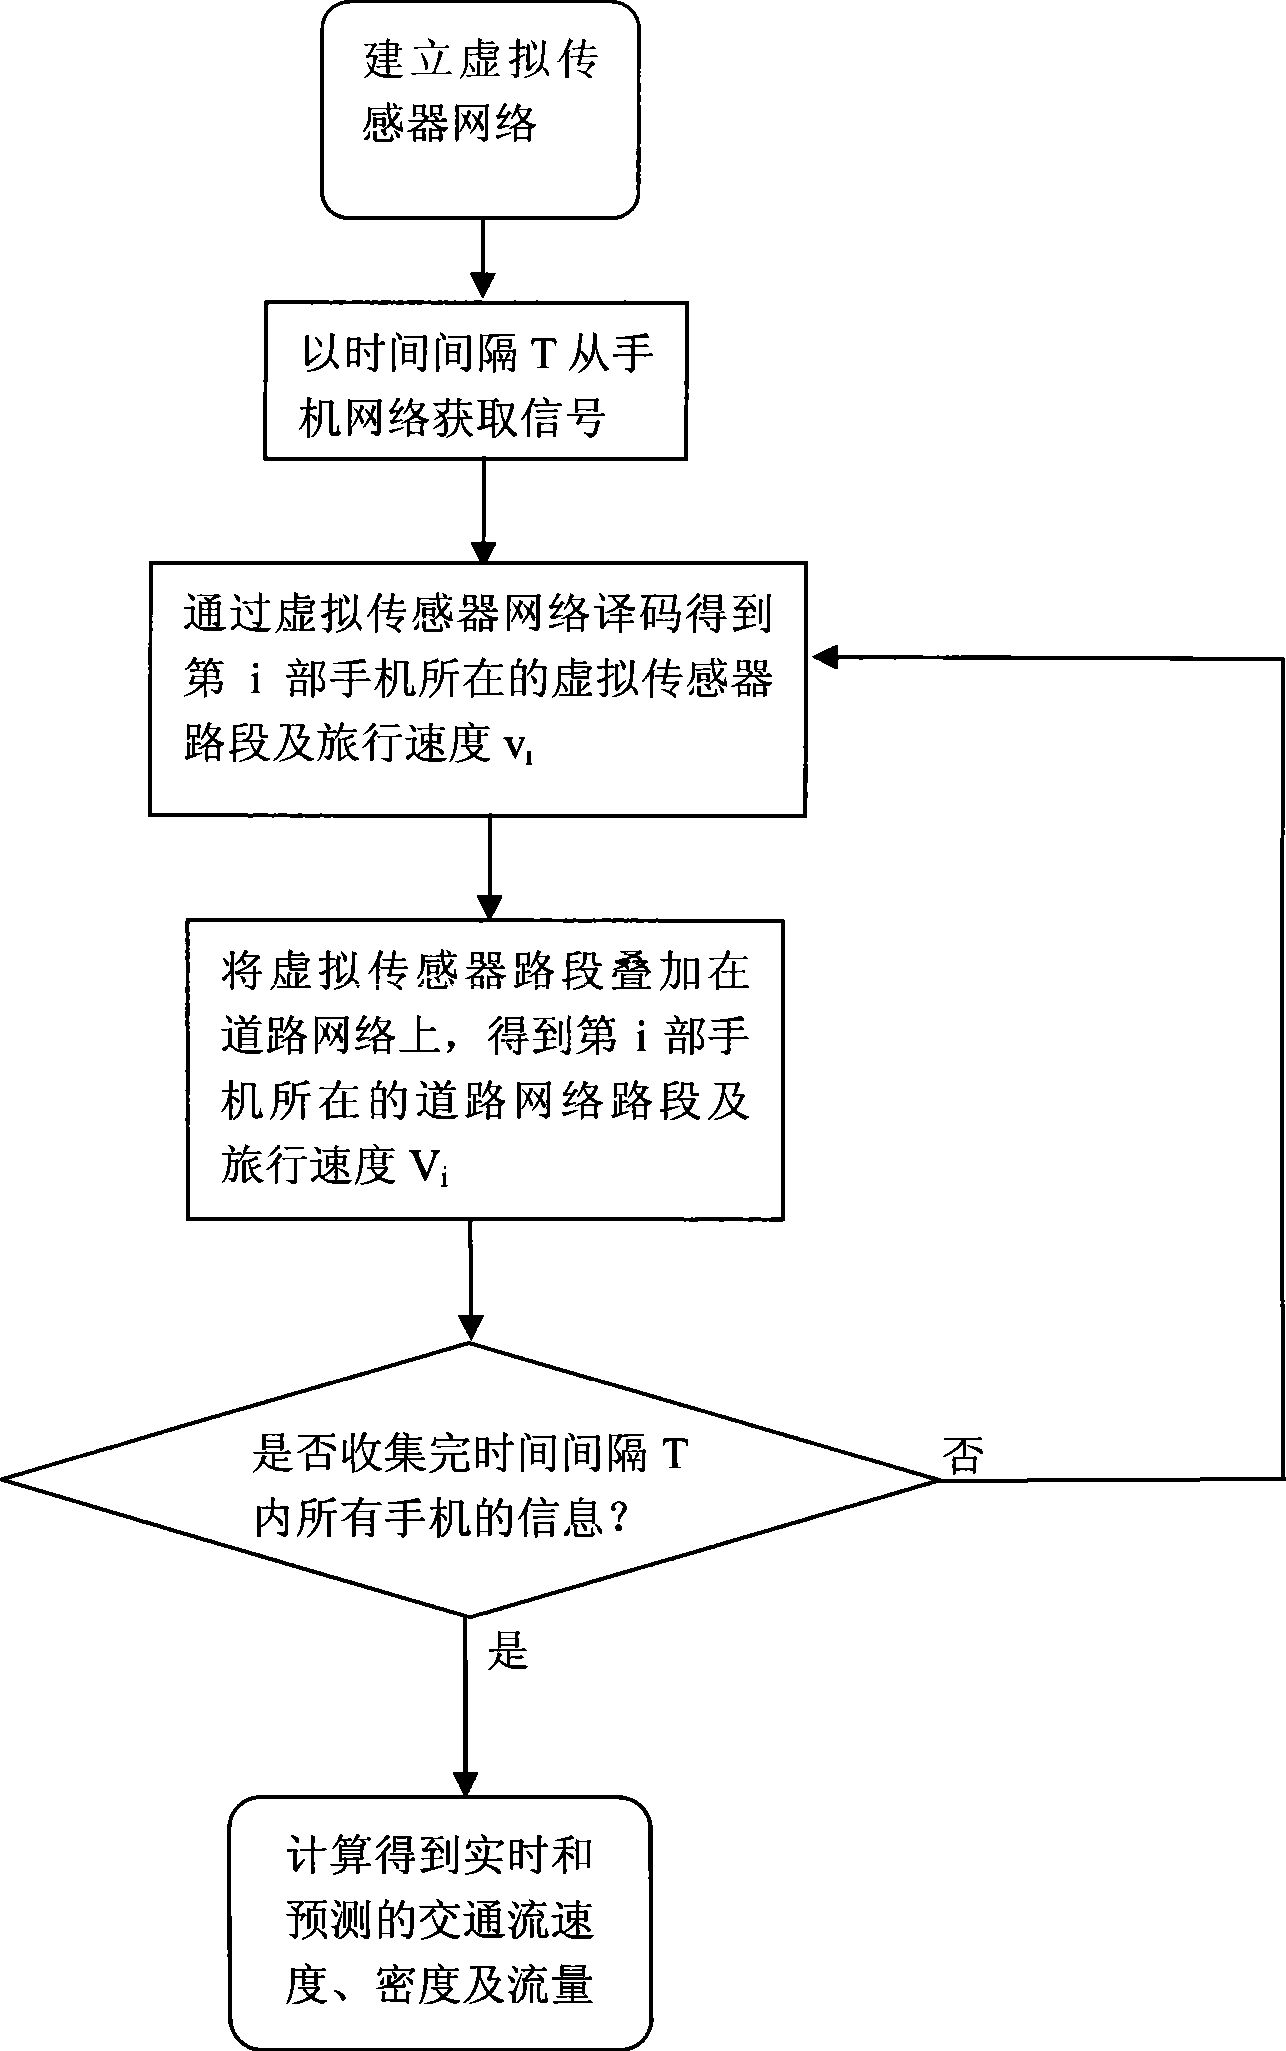 Method for detecting traffic state based on mobile phone signal data